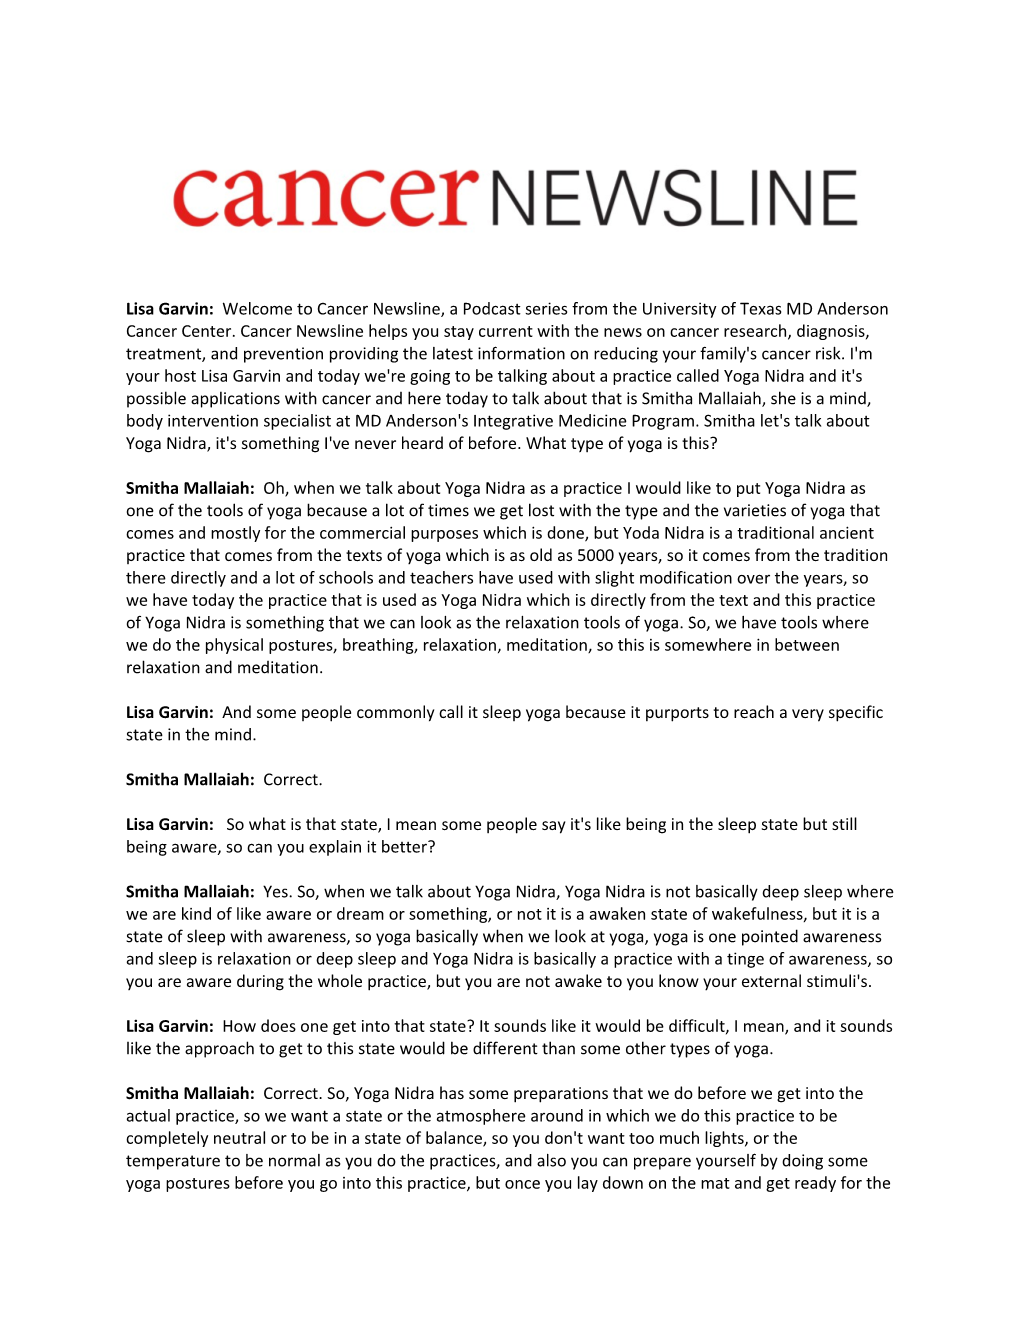 Lisa Garvin: Welcome to Cancer Newsline, a Podcast Series from the University of Texas